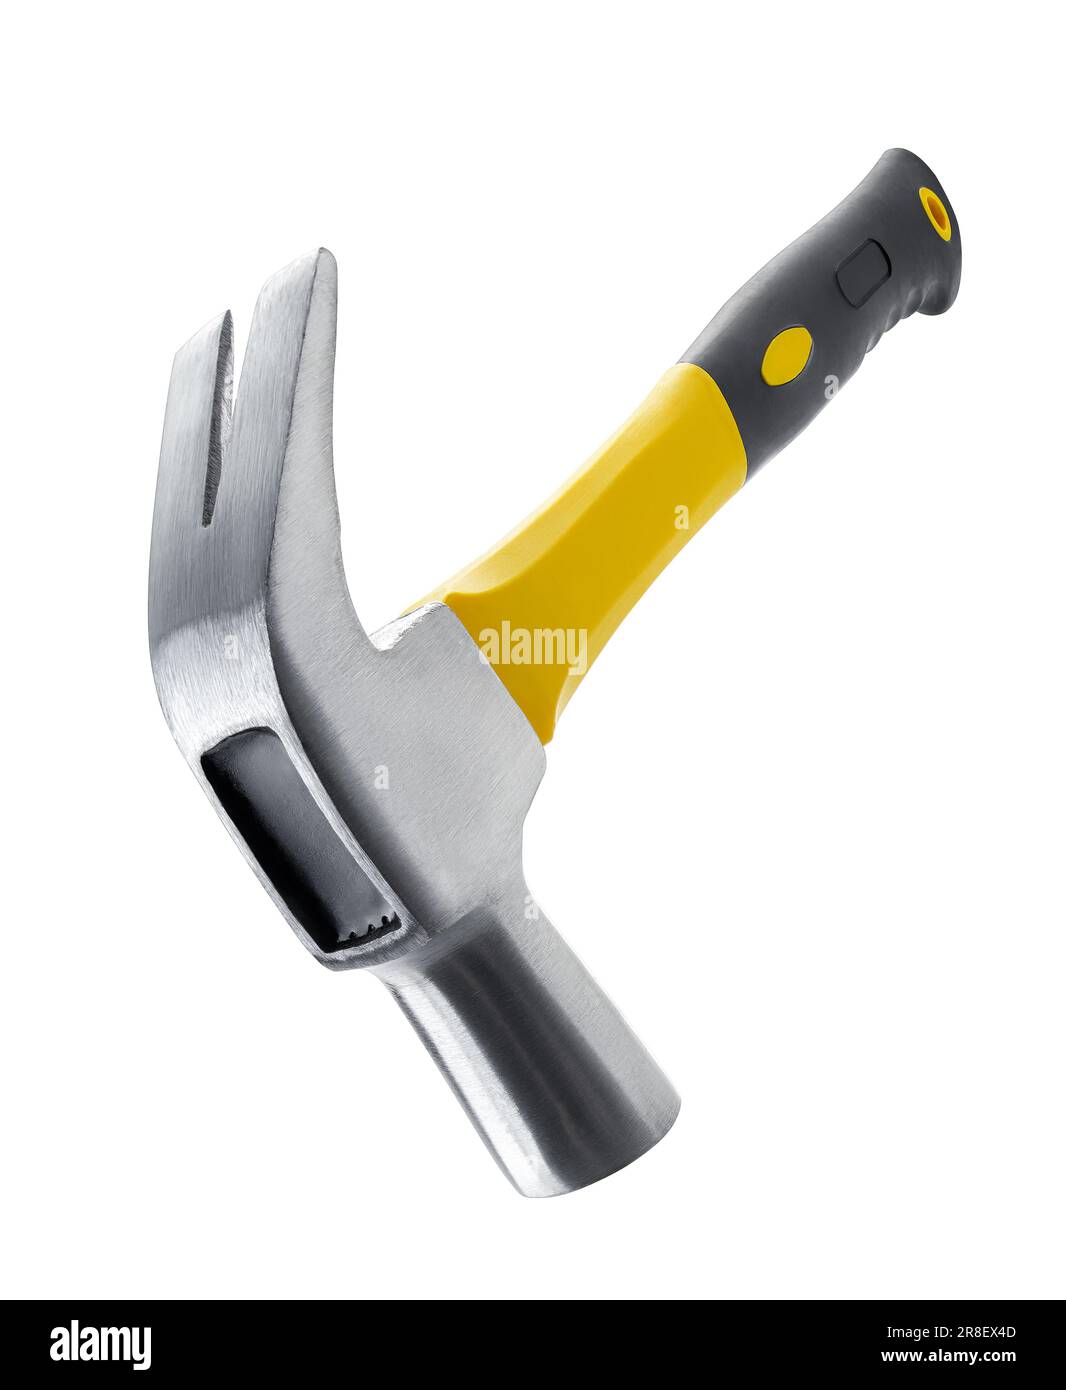 Claw hammer isolated on white background - clipping path included Stock Photo